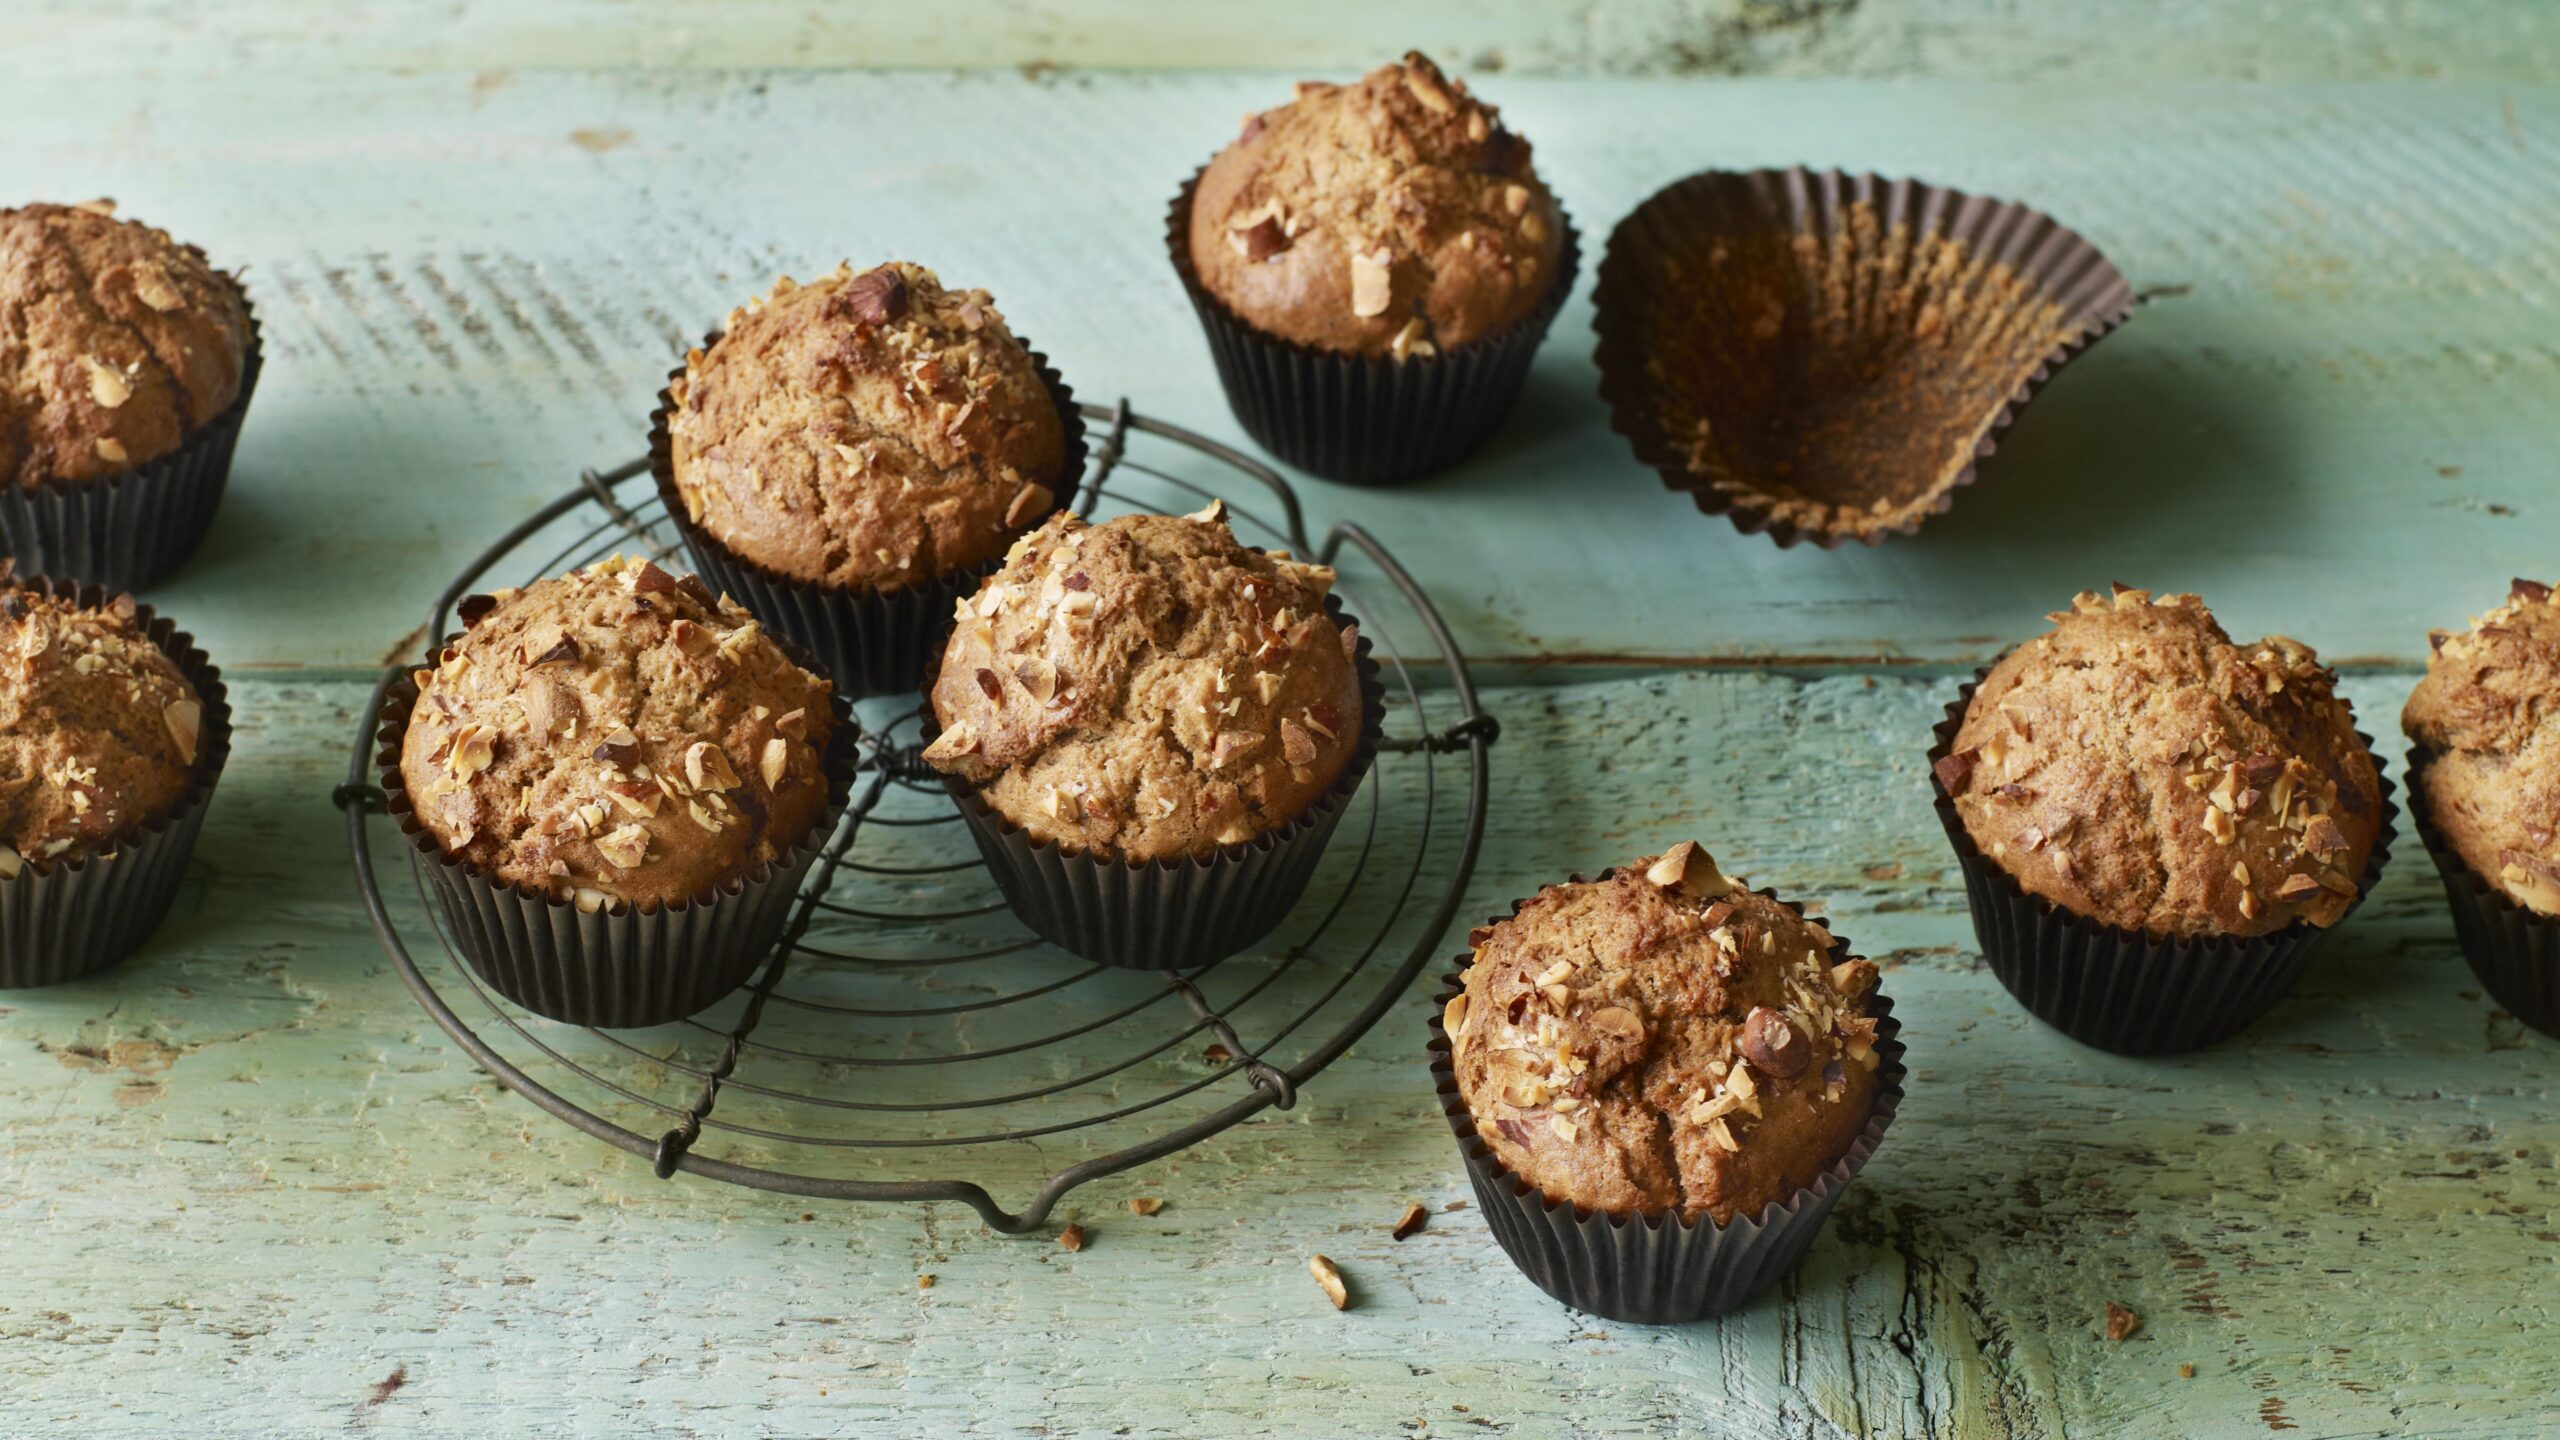  Warm and cozy muffins to brighten up your day!